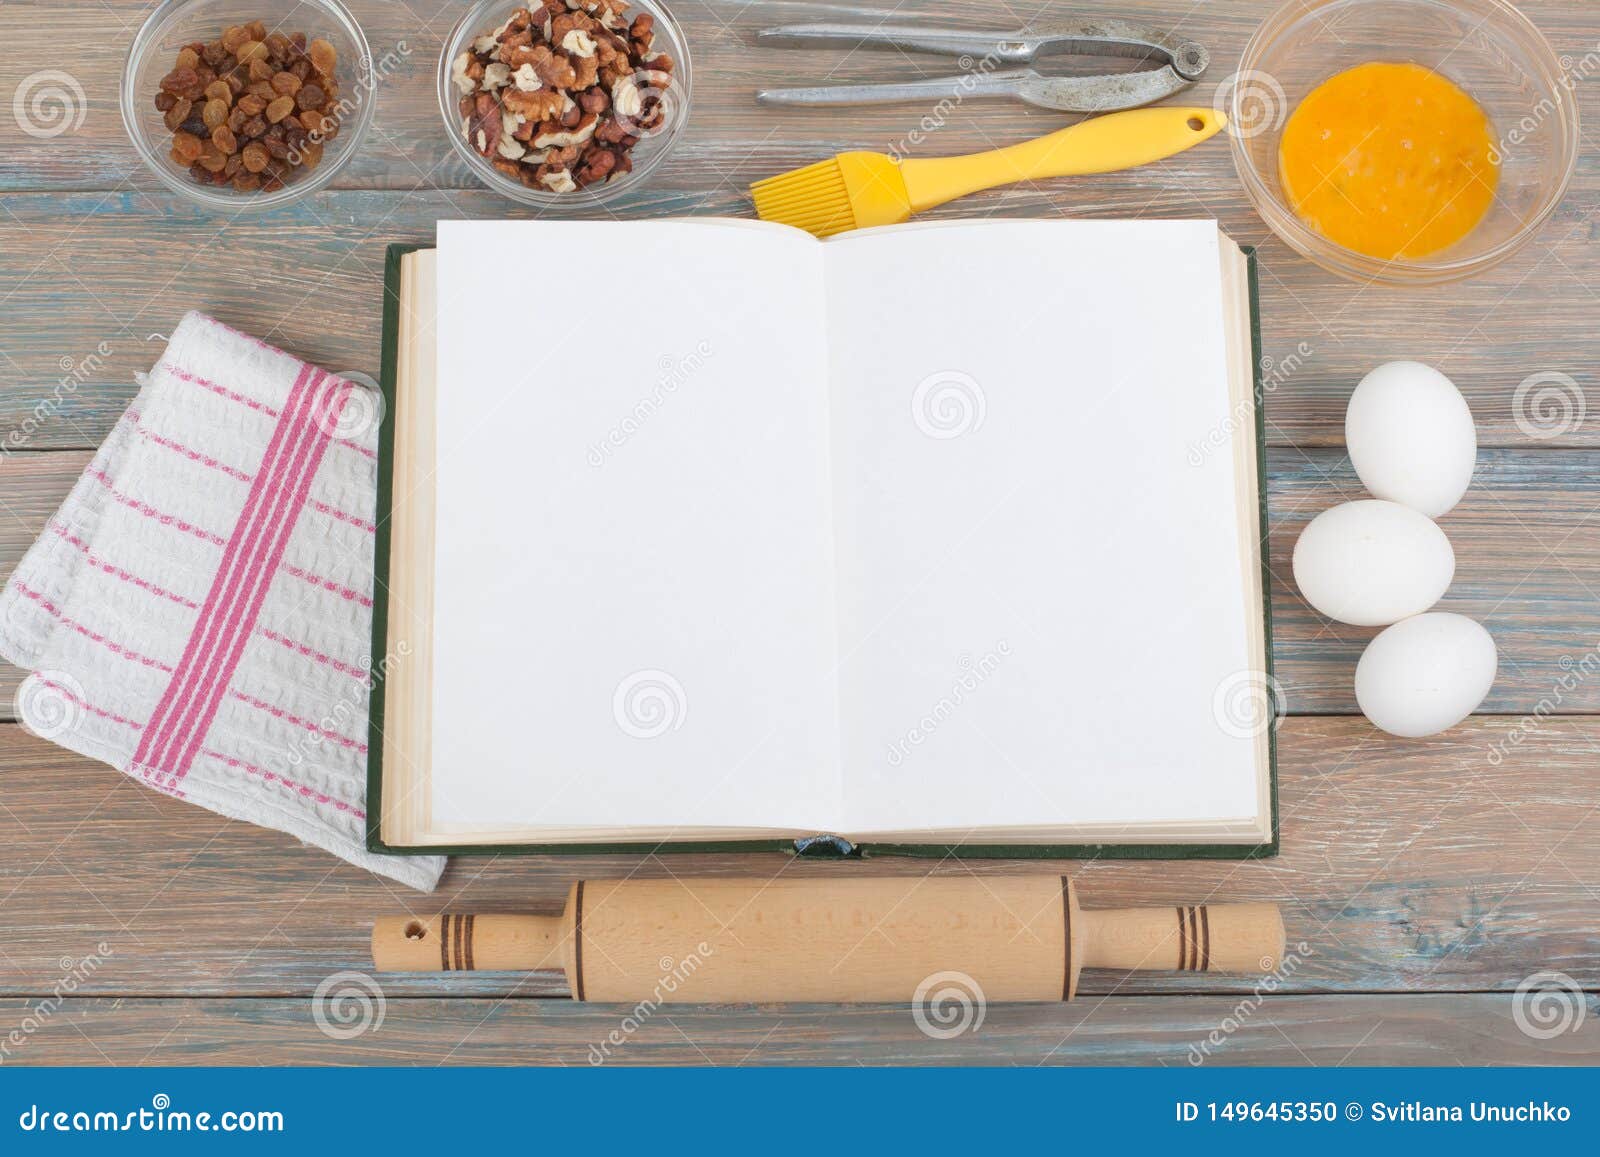 Recipe Cook Blank Book on Wooden Background, Spoon, Rolling Pin ...